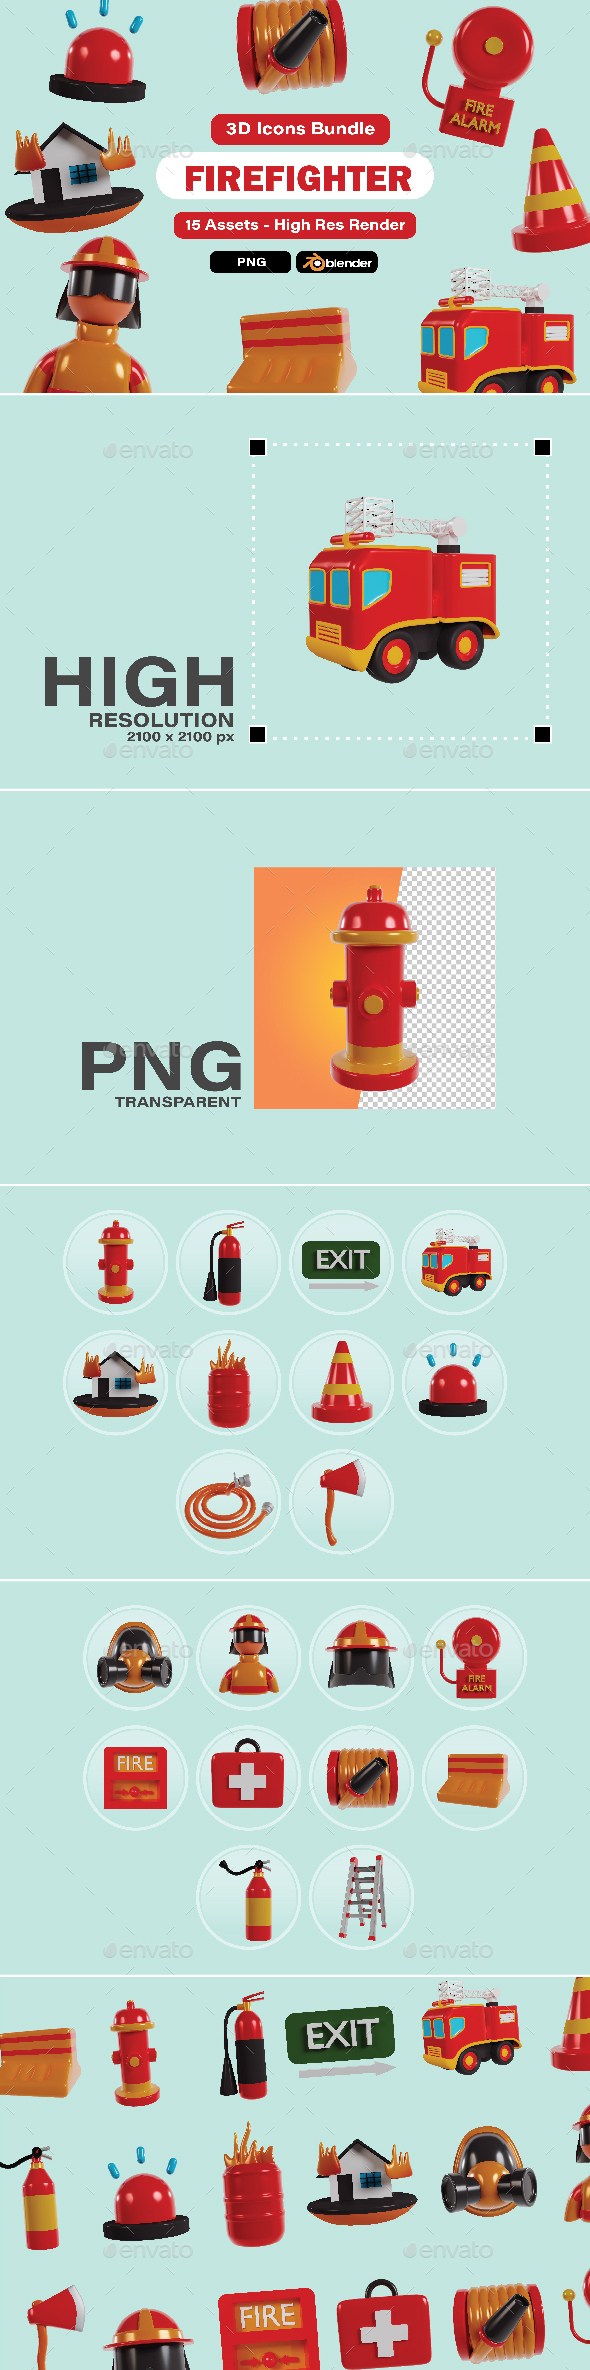 Firefighter 3d icons element